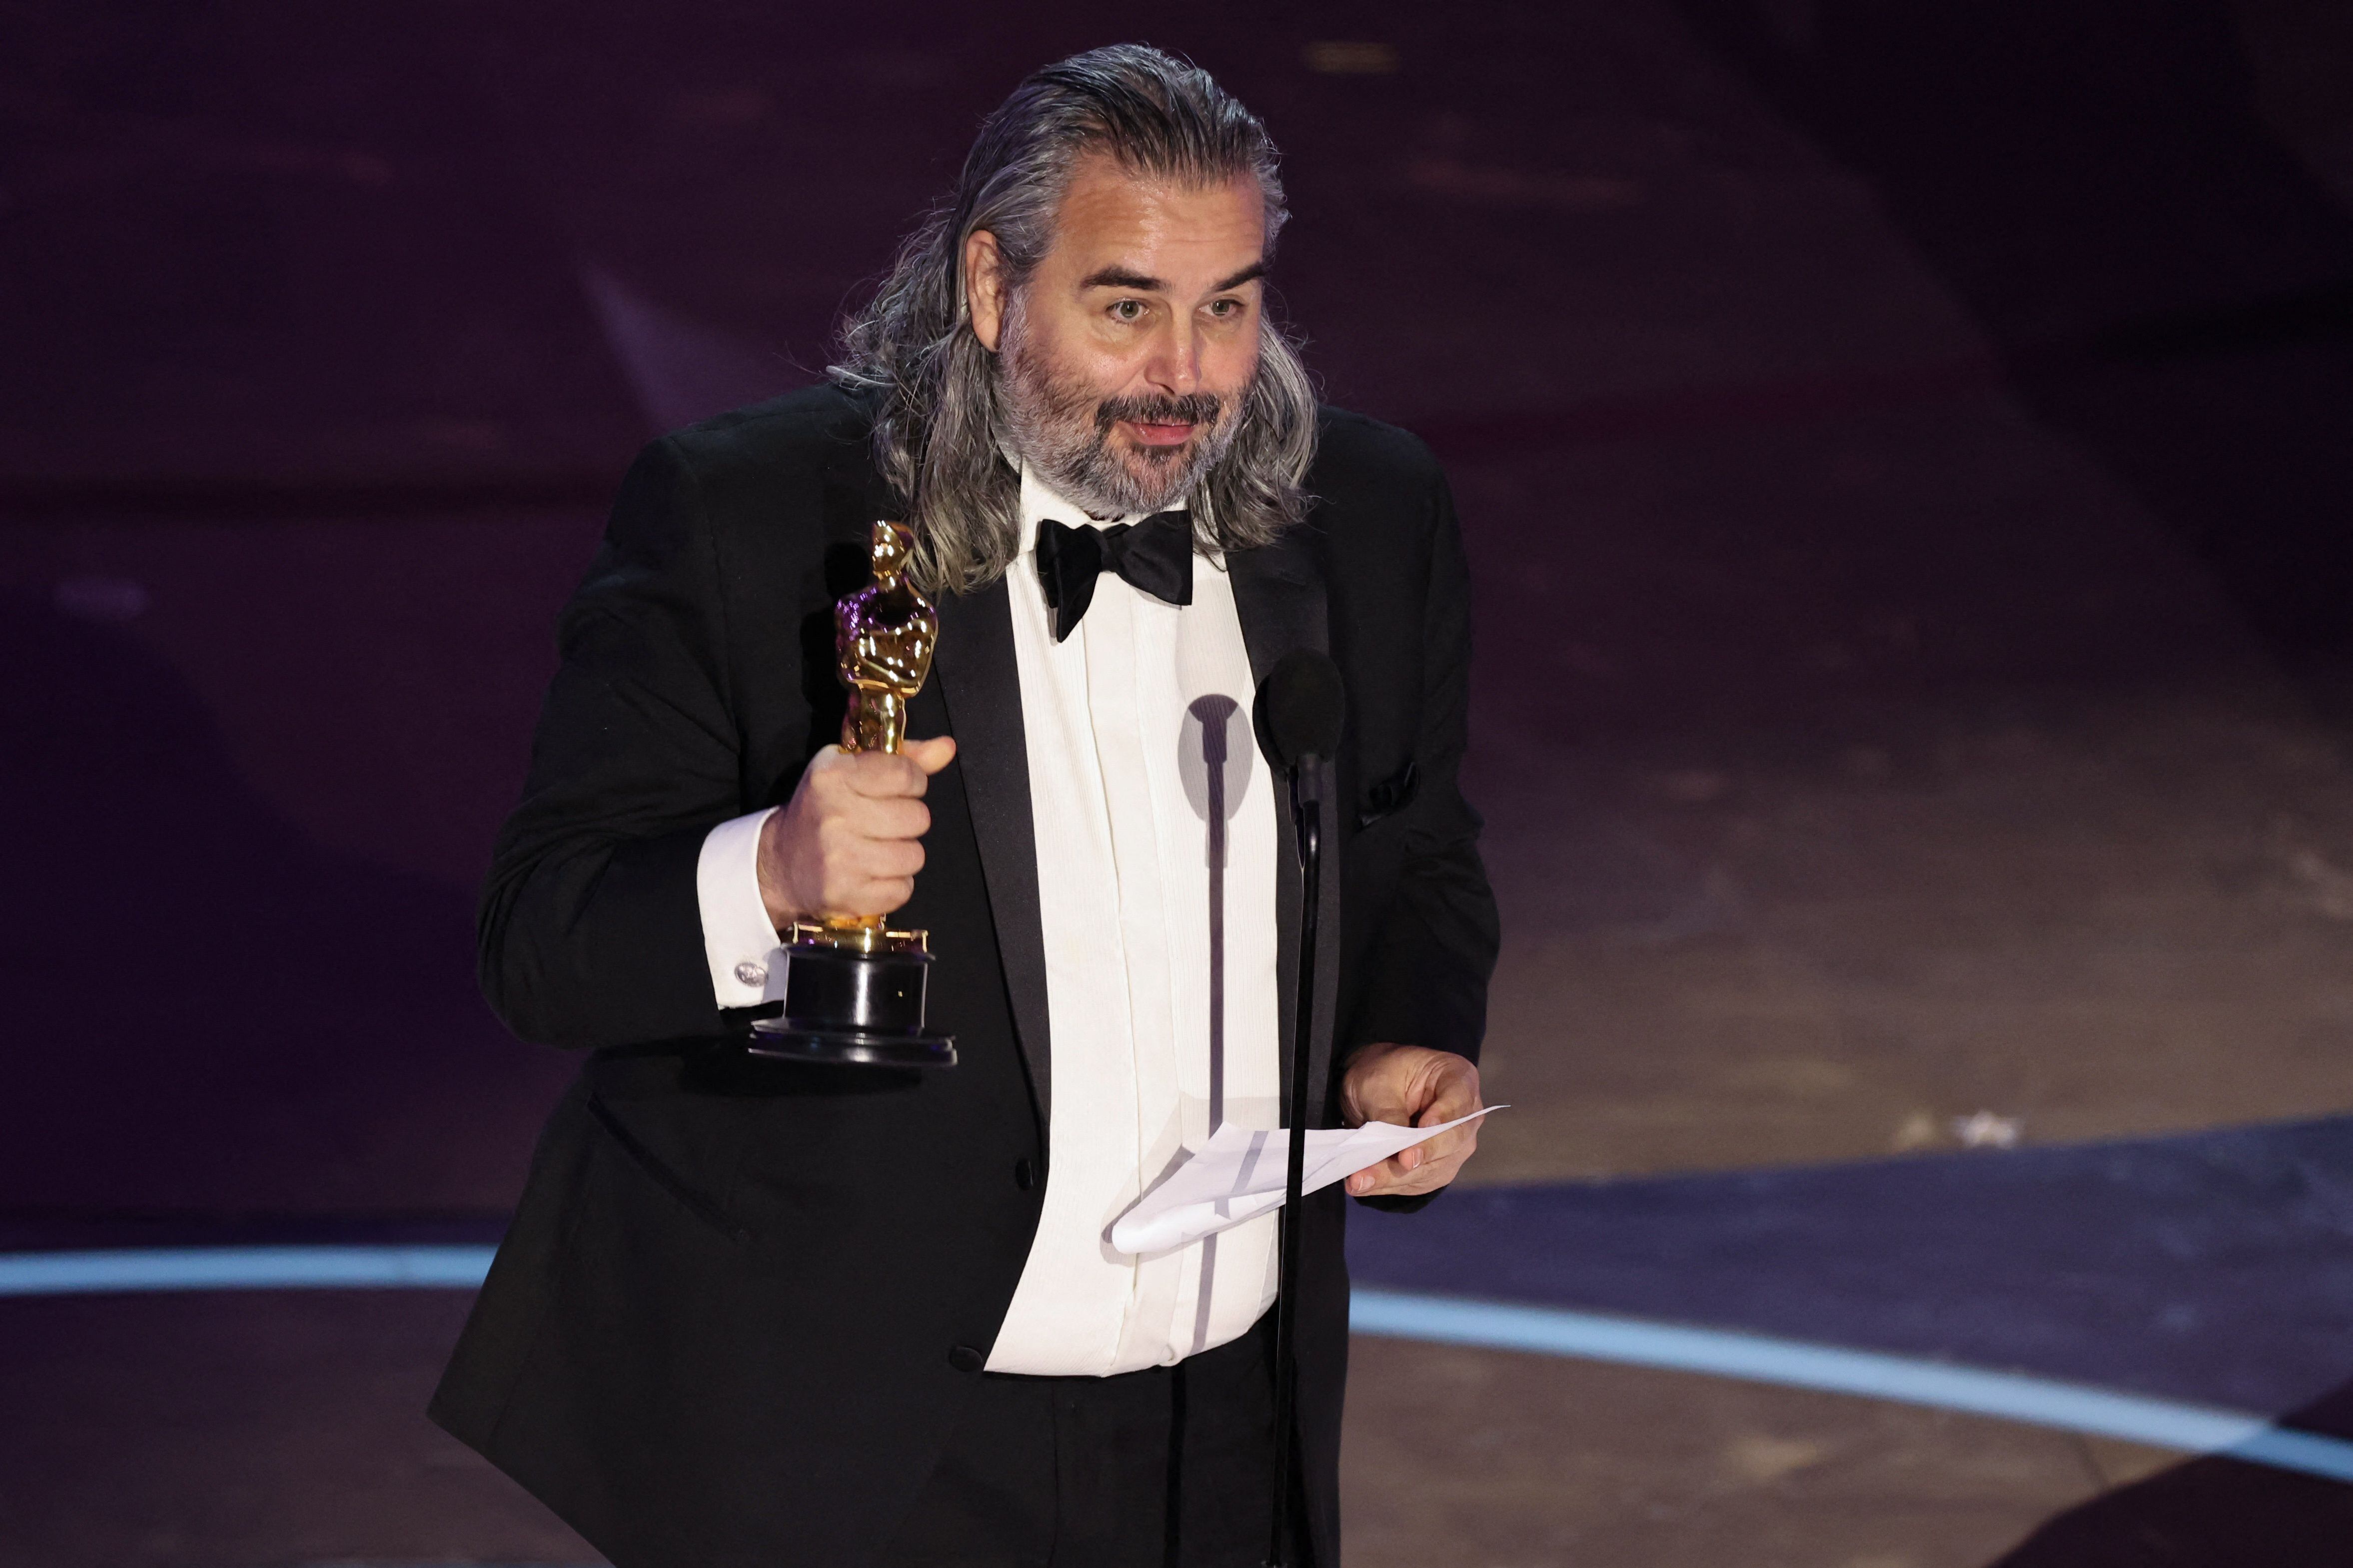 Hoyte van Hoytema wins the Oscar for Best Cinematography for "Oppenheimer" during the Oscars show at the 96th Academy Awards in Hollywood, Los Angeles, California, U.S., March 10, 2024. REUTERS/Mike Blake